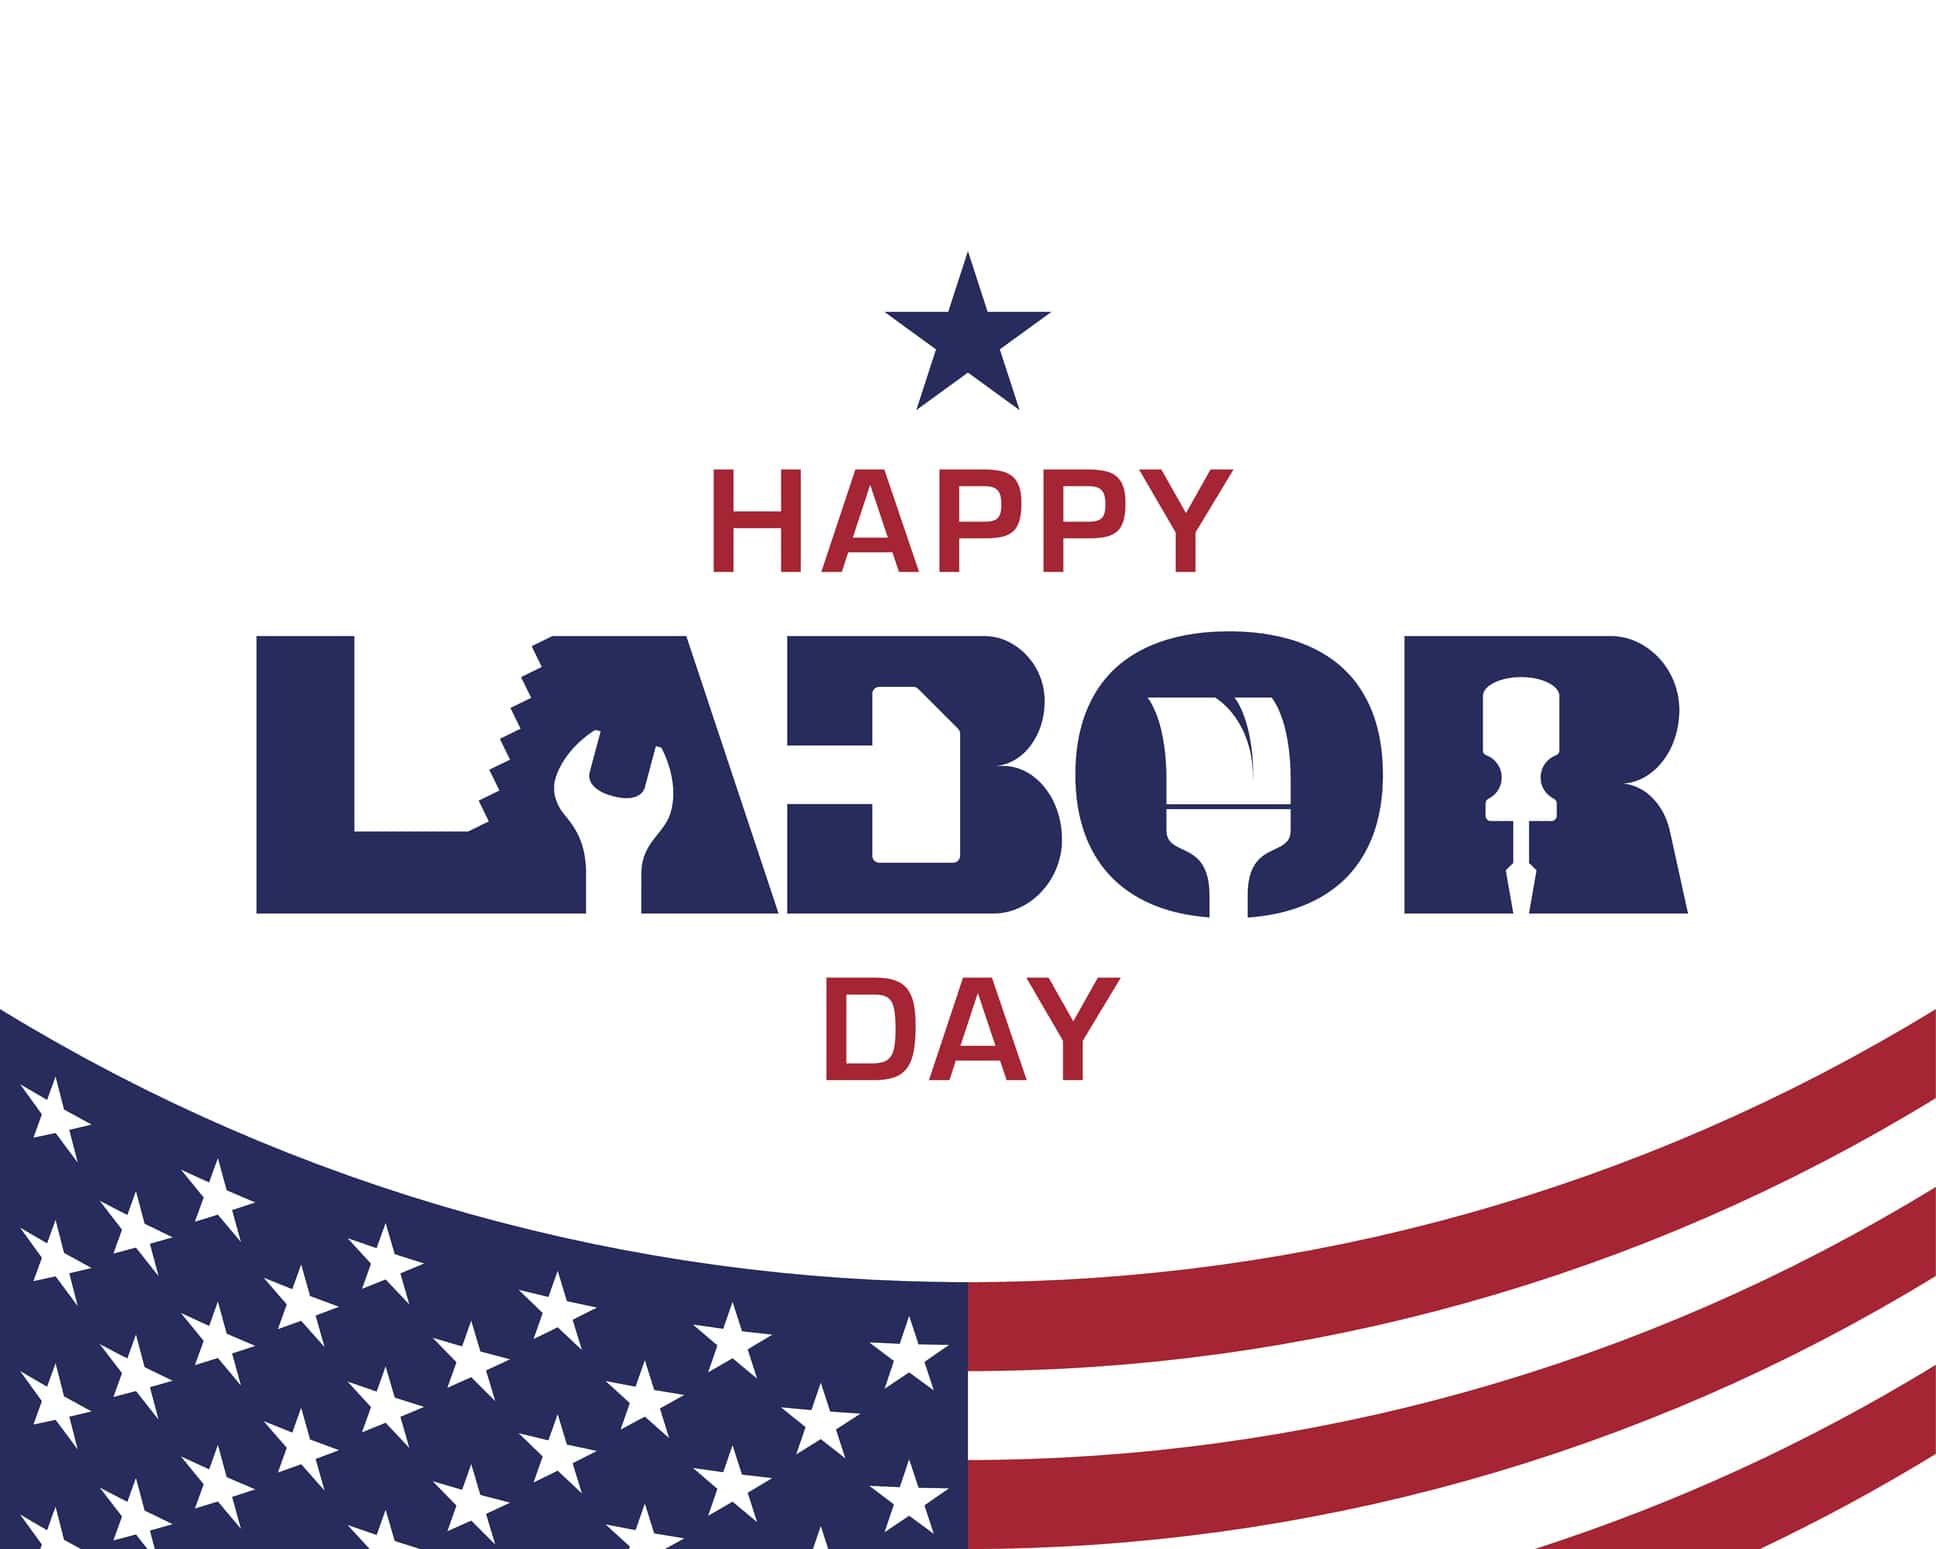 reflections-for-labor-day-westside-news-inc